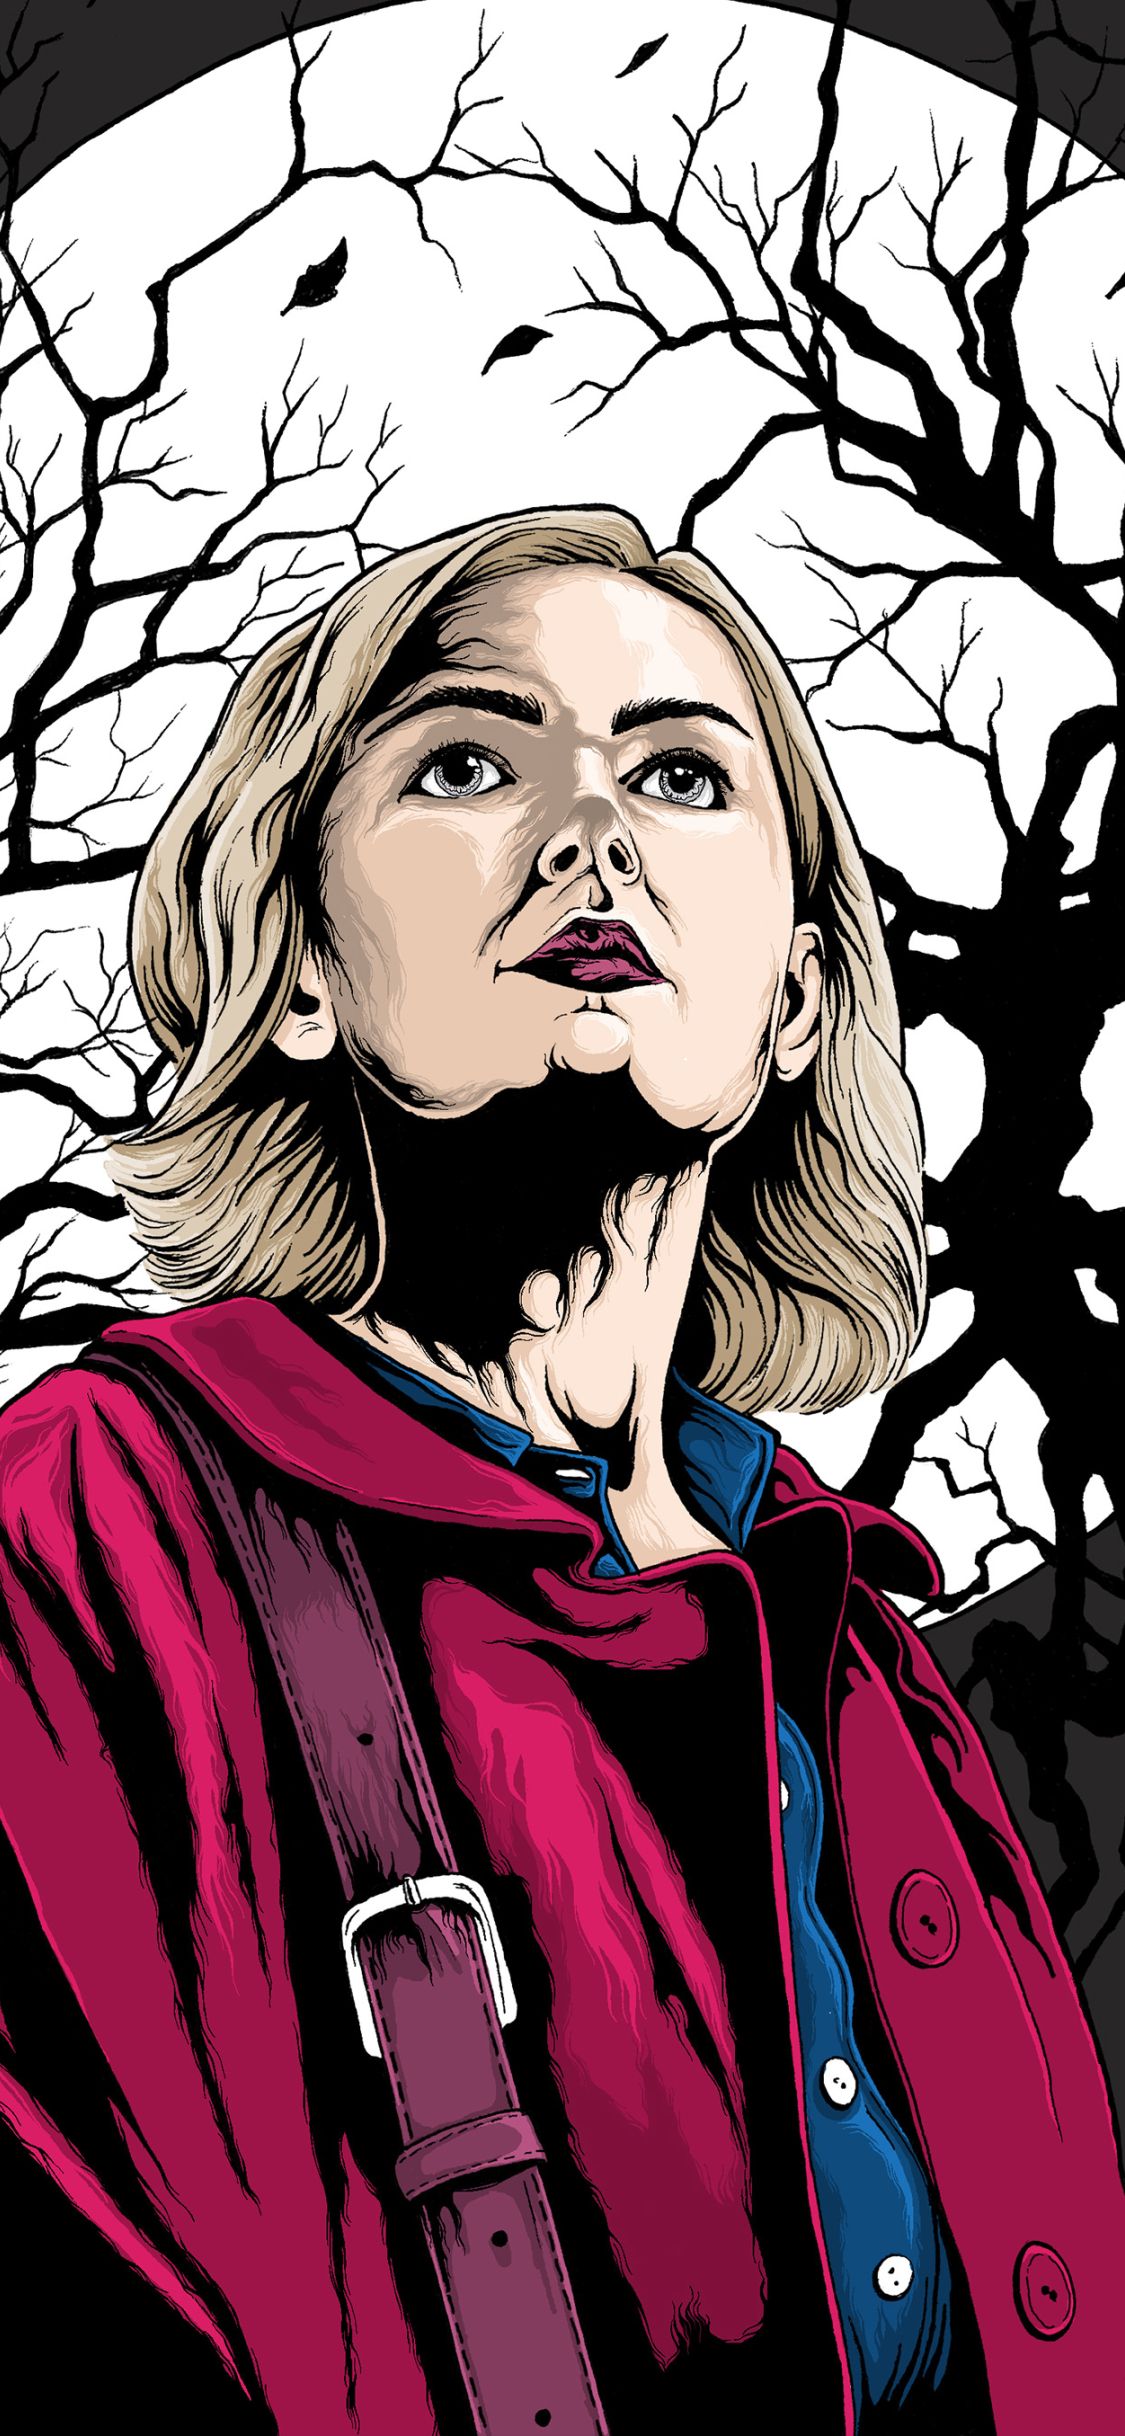 The Chilling Adventures Of Sabrina Season 2 Wallpapers